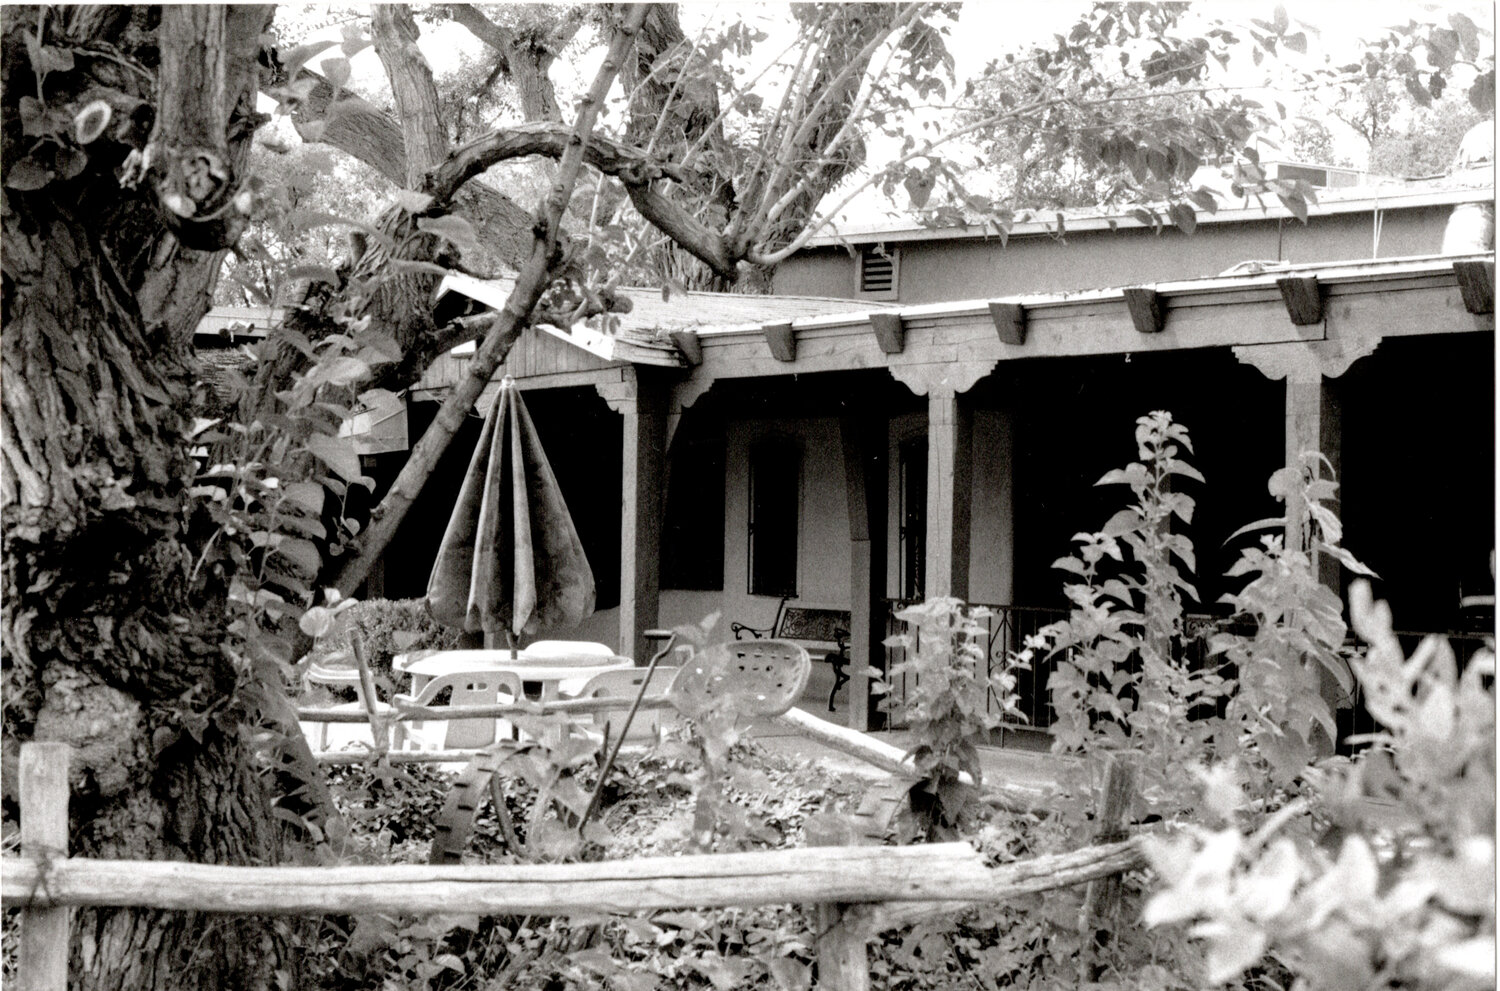 The entrance to the Rancho de Corrales restaurant as it appeared in the 1990s. (Courtesy Corrales Historical Society)